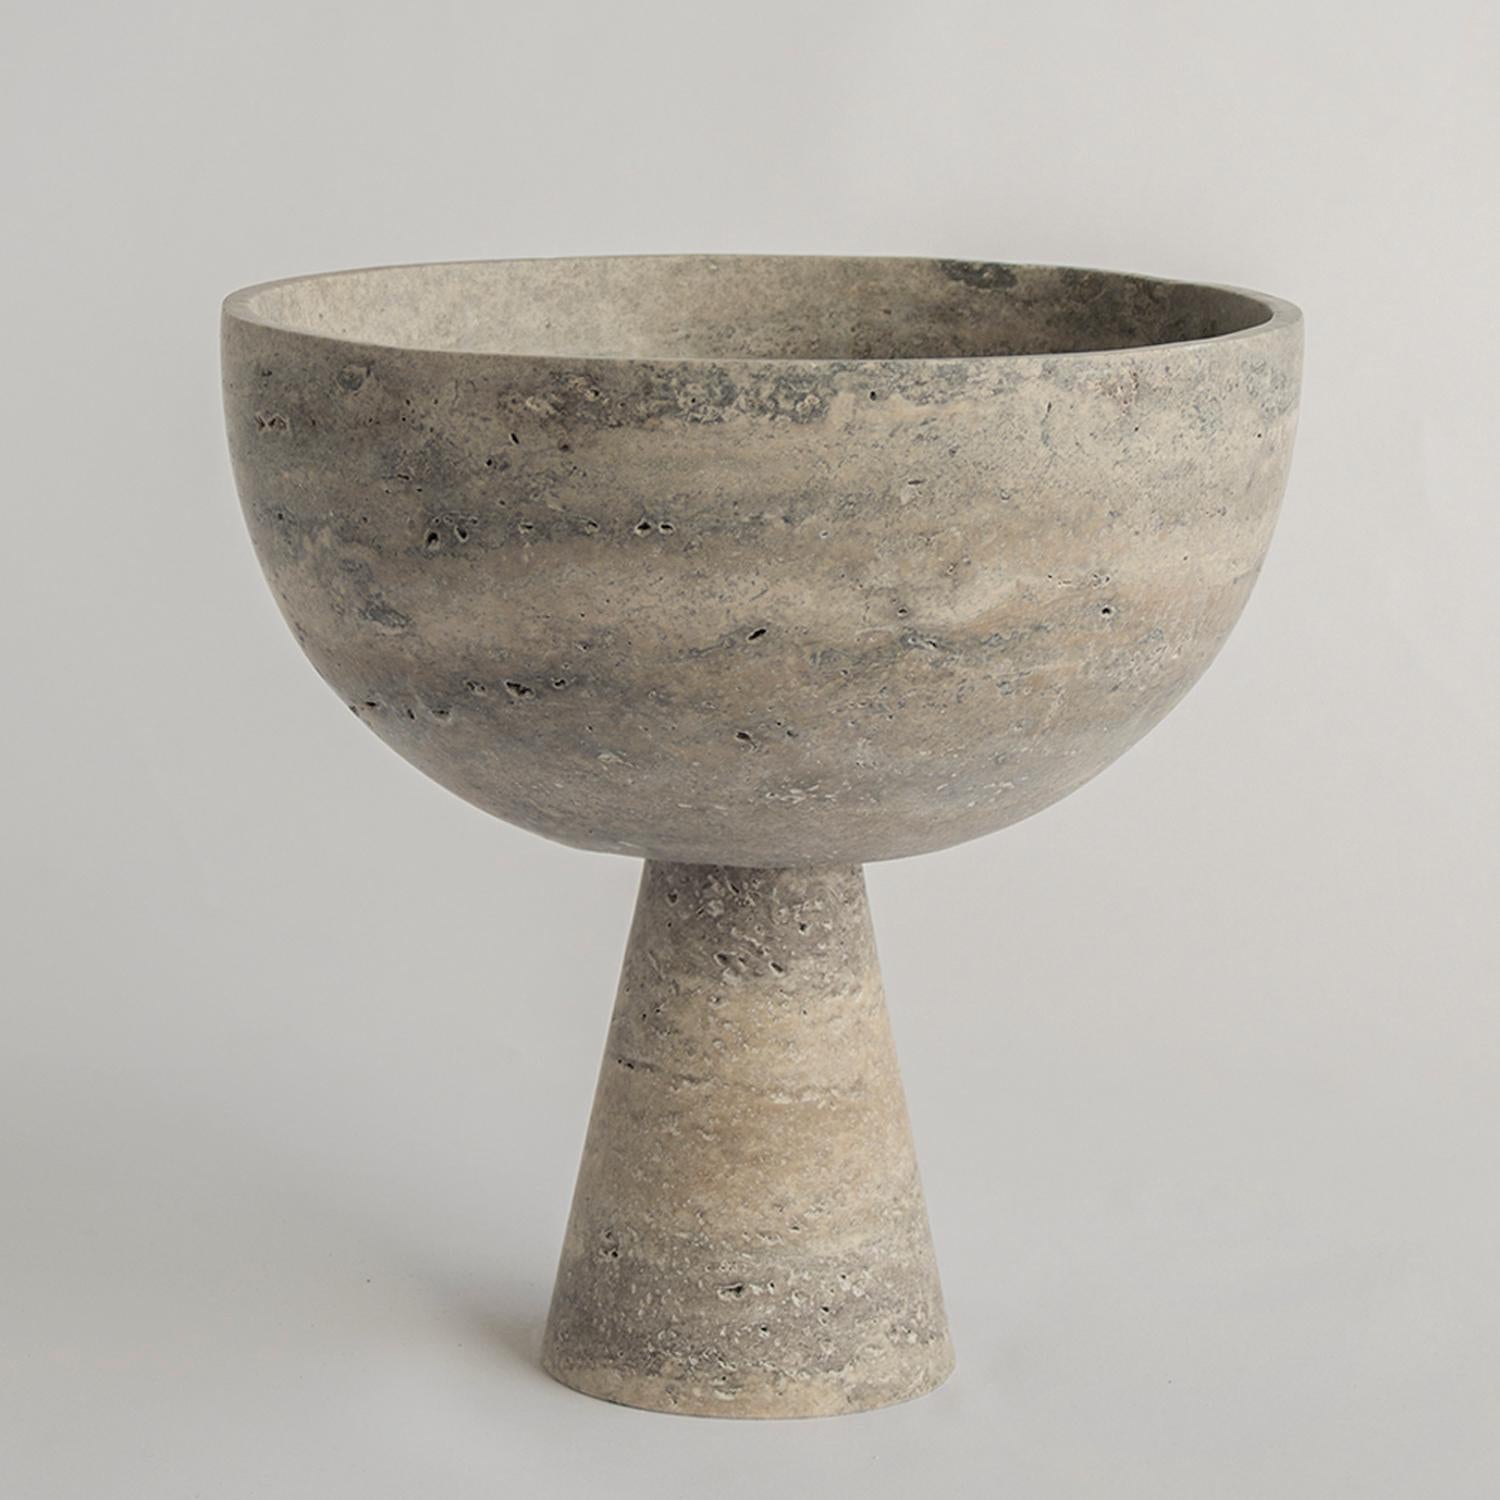 A substantial silver travertine bowl with unique structure rests atop a pedestal for a grand presentation of fruits and vegetables. 

Due to the nature of the material, each piece may vary slightly in appearance. We encourage embracing the